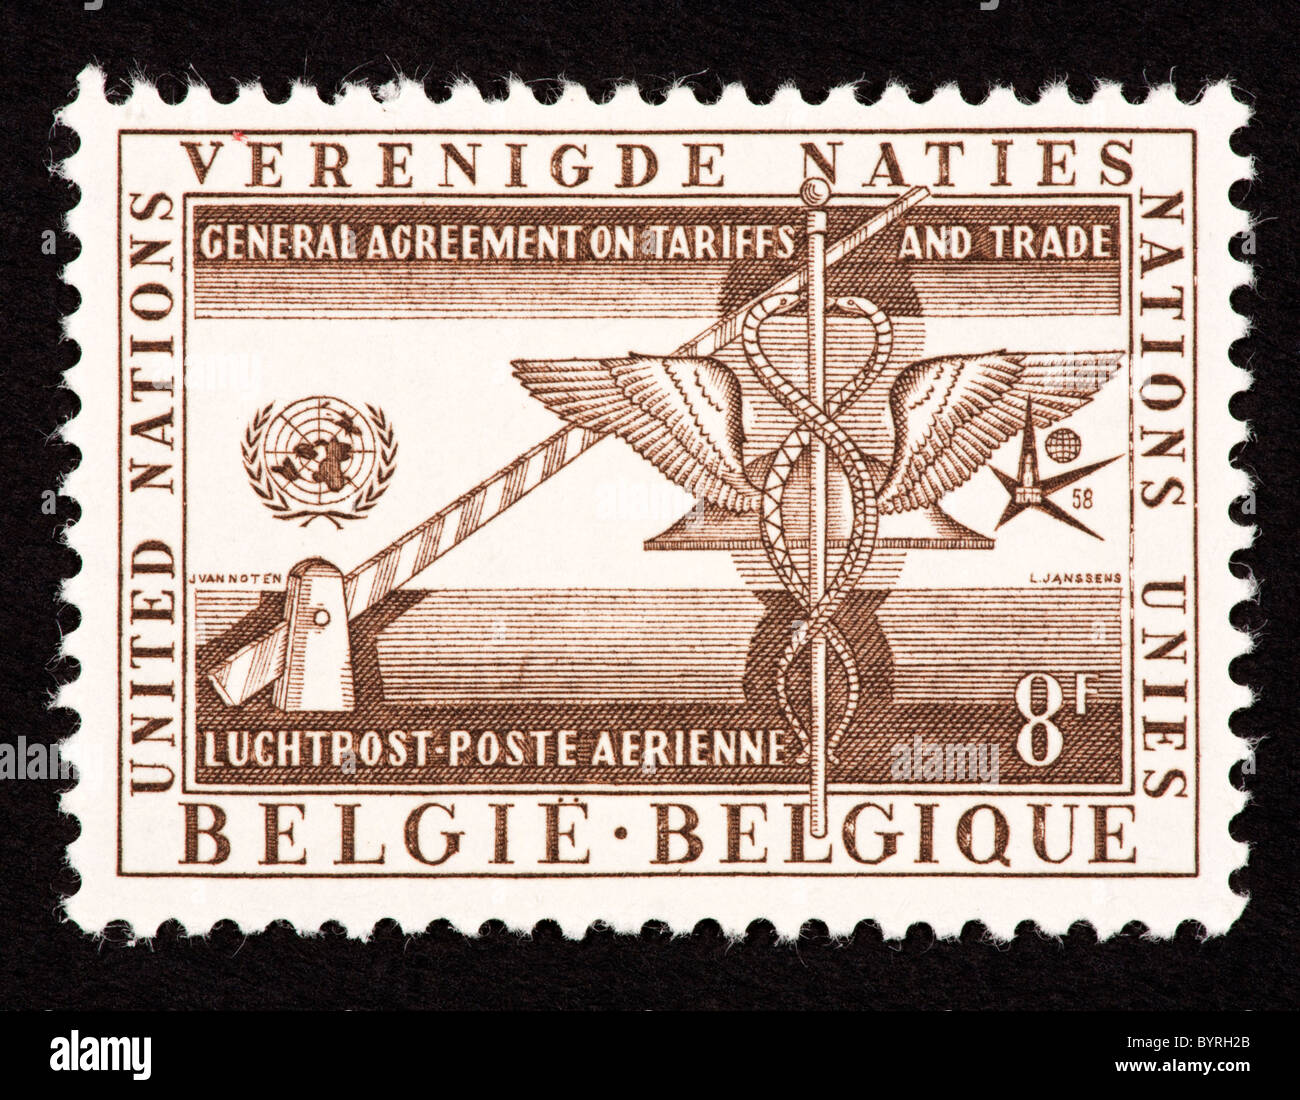 Postage stamp from Belgium depicting trade and commerce issued to honor the United Nations. Stock Photo